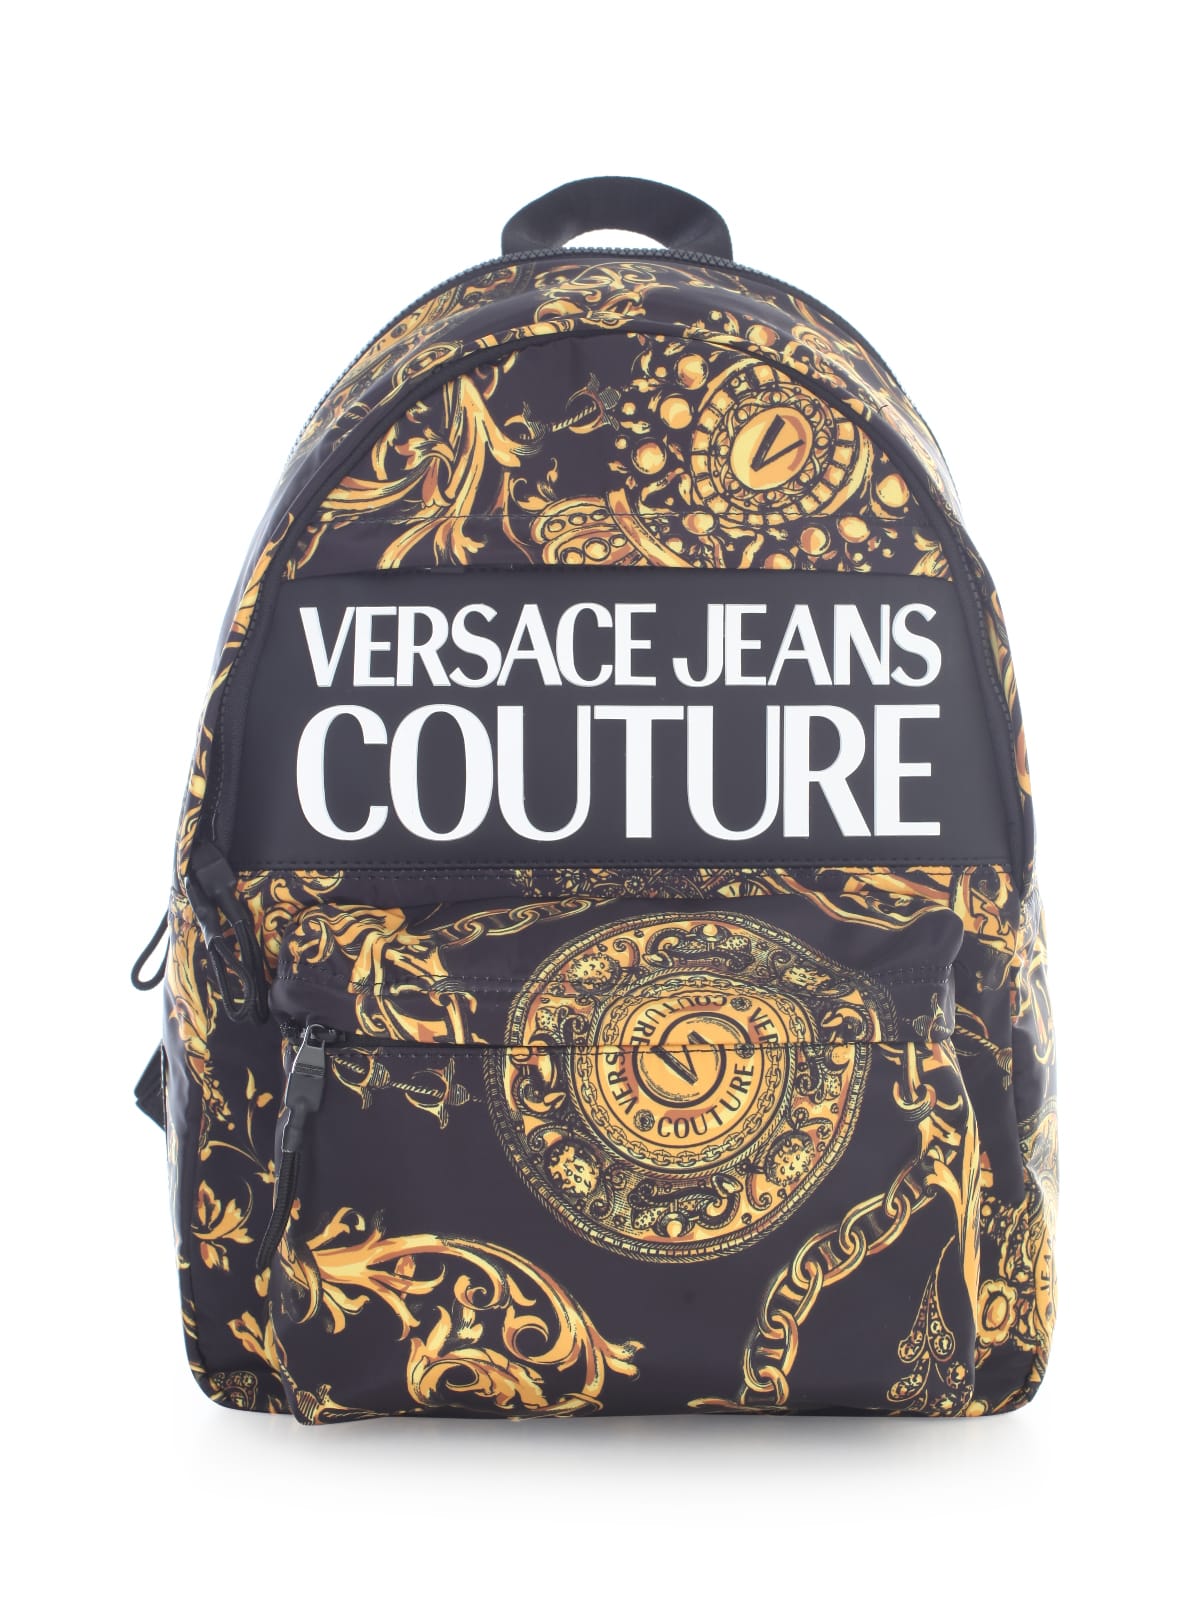 Versace Jeans Couture Sketch 1 Bags Printed Nylon Macrologo Backpack